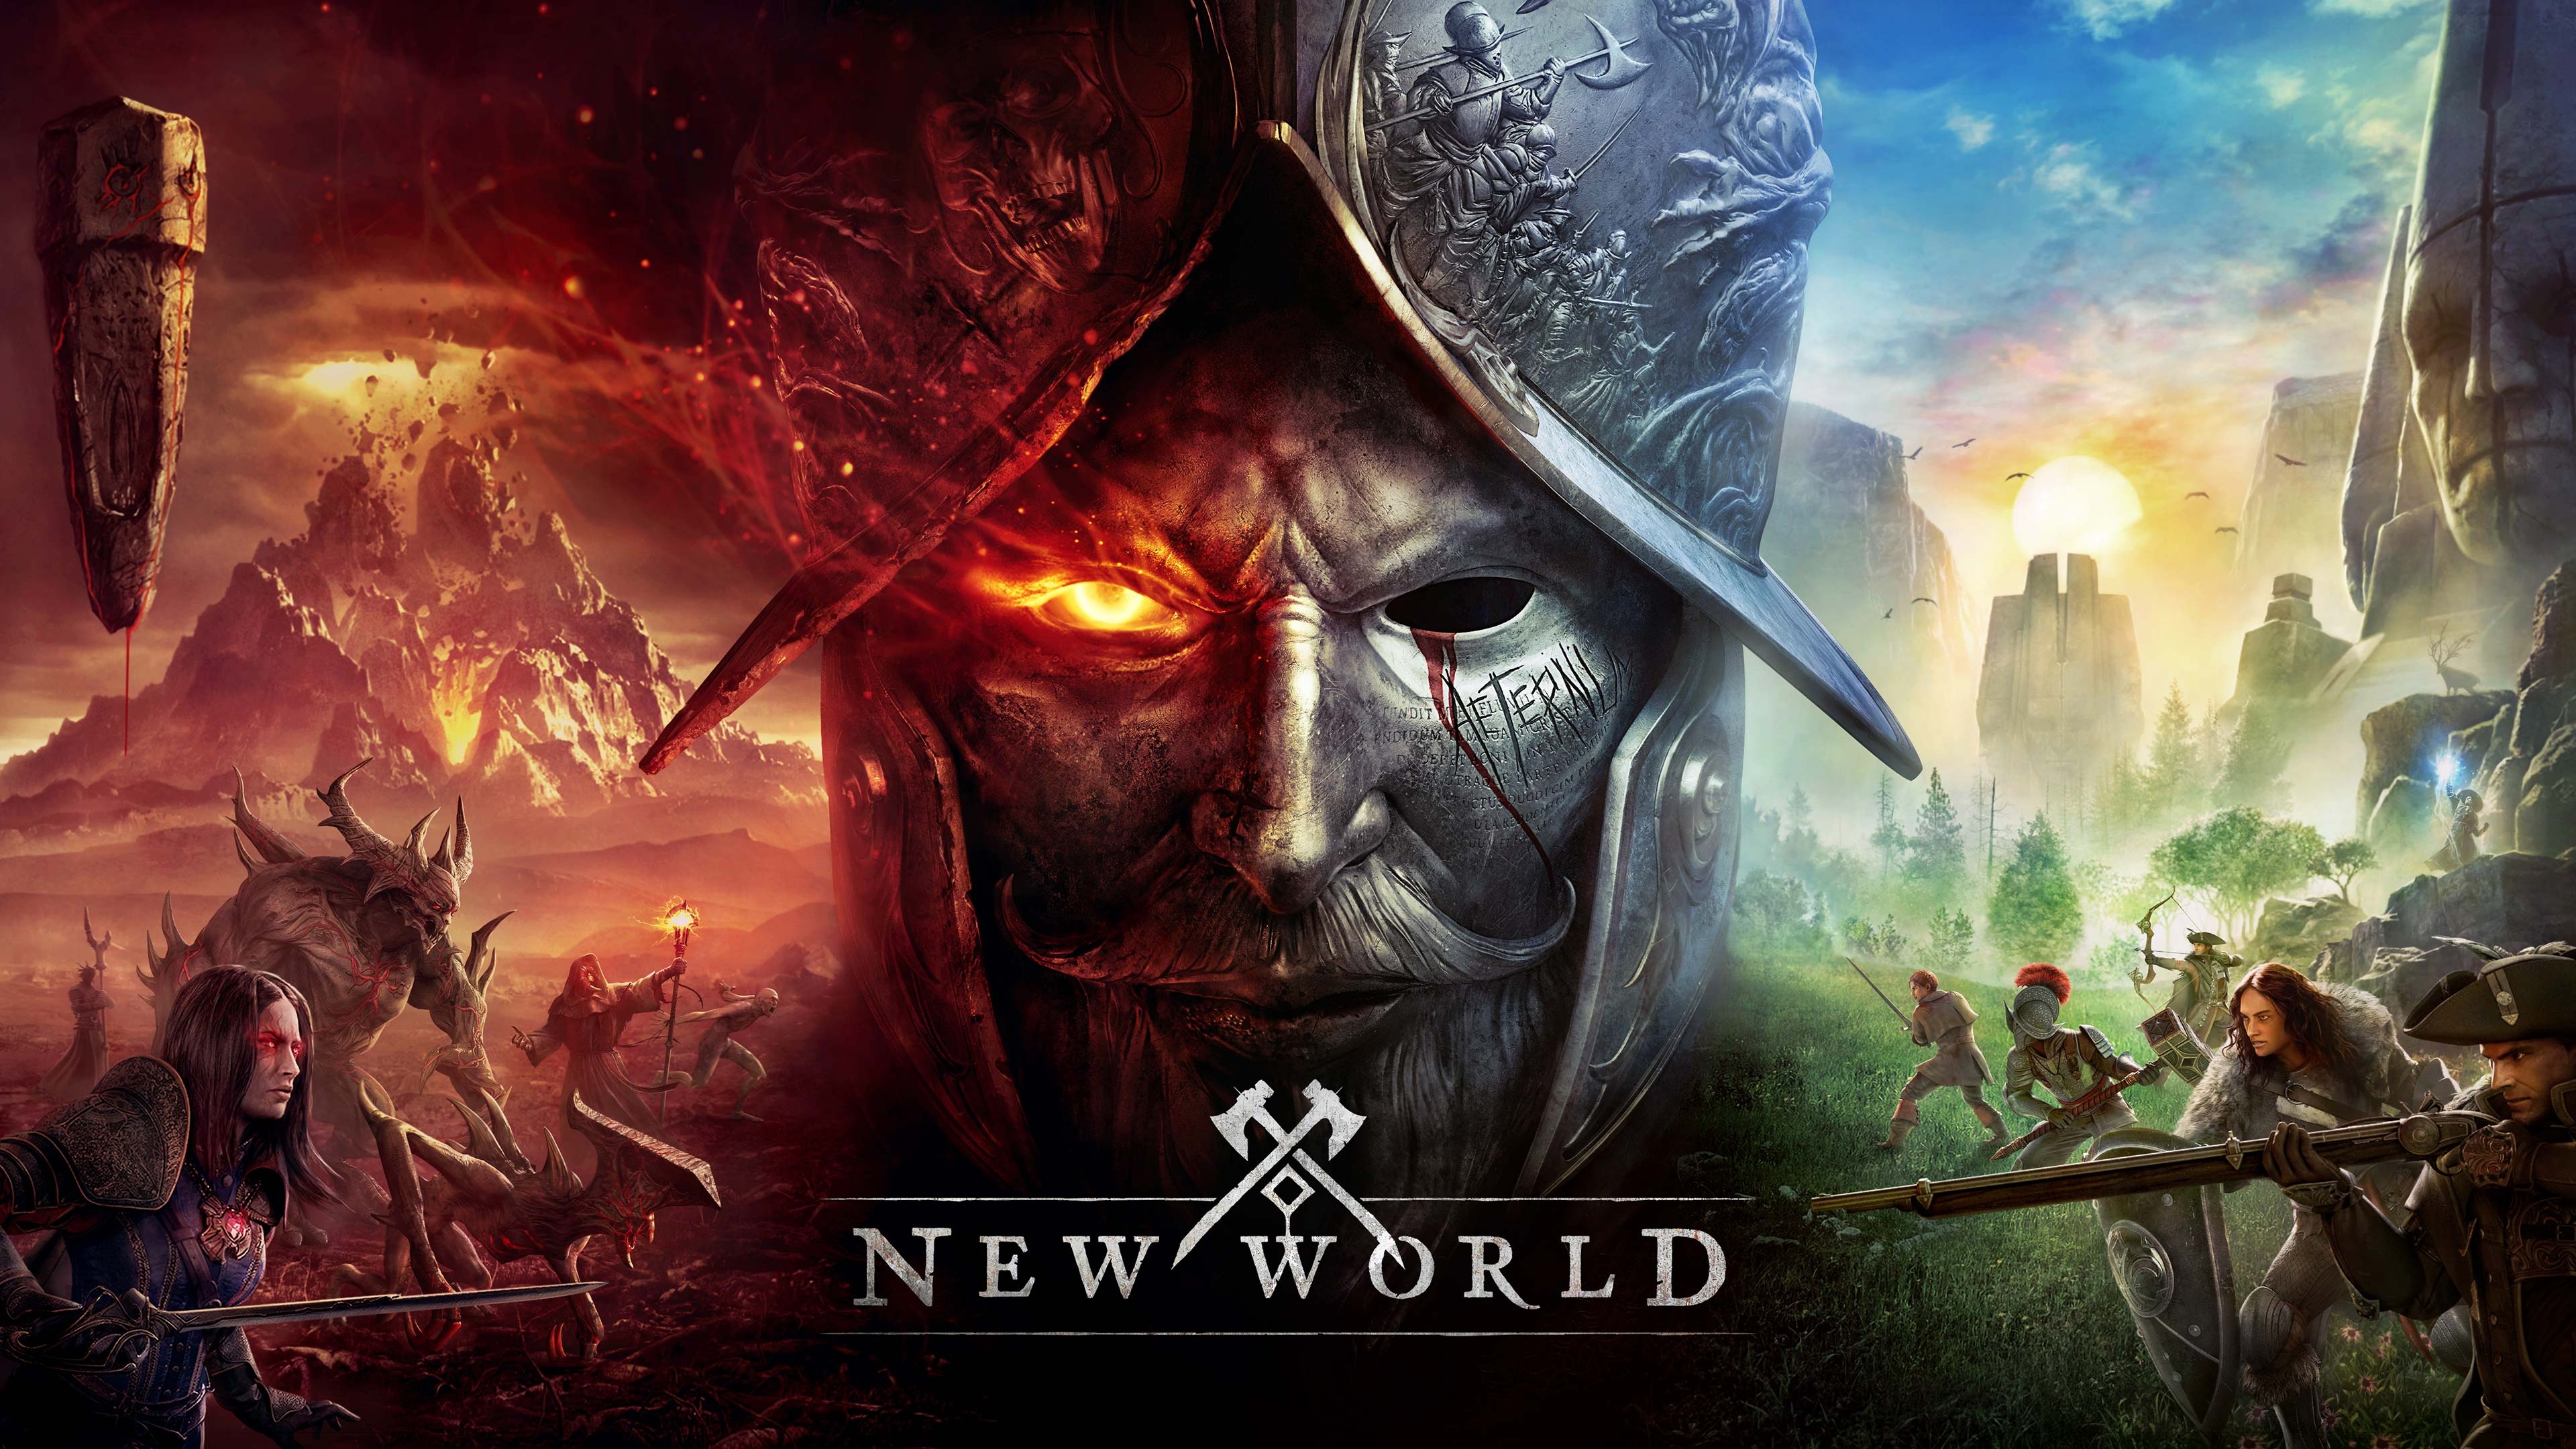 Prime Gaming and free loot for New World : r/newworldgame